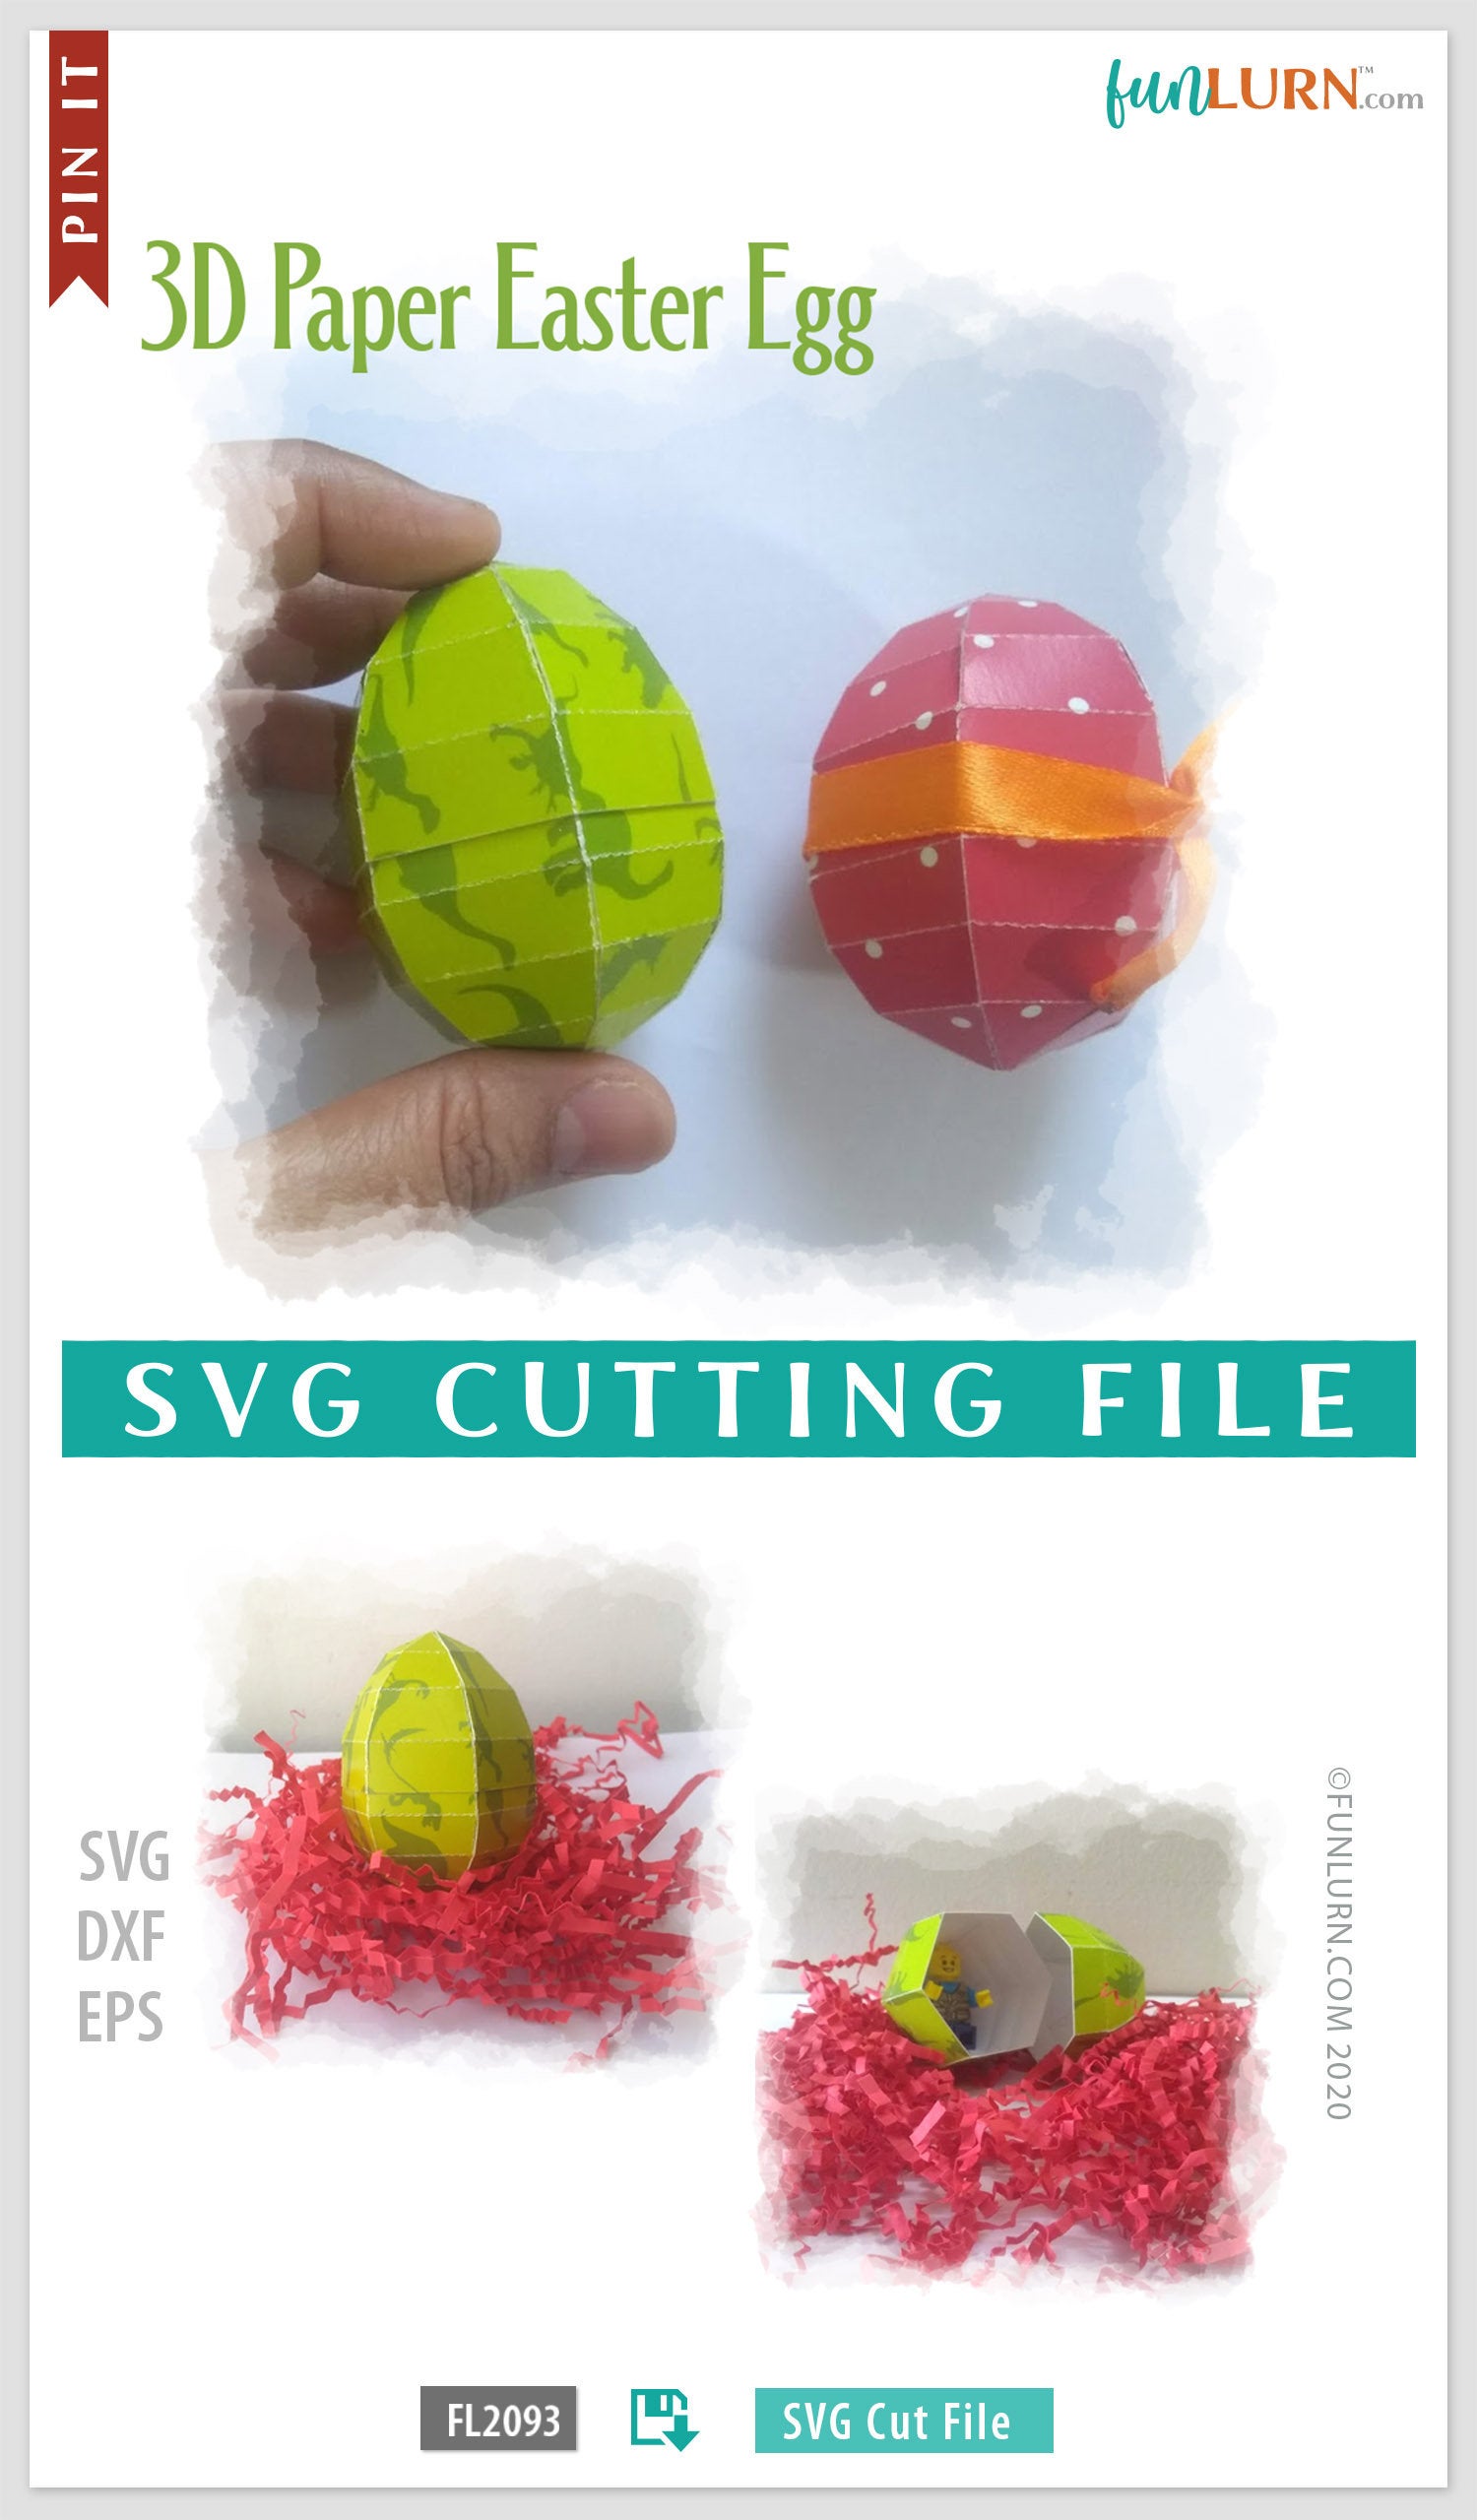 Download 3d Paper Easter Eggs Svg They Can Be Opened Like Plastic Easter Eggs Great For Crafting With Kids Svg Files For Cricut And Silhouette Funlurn